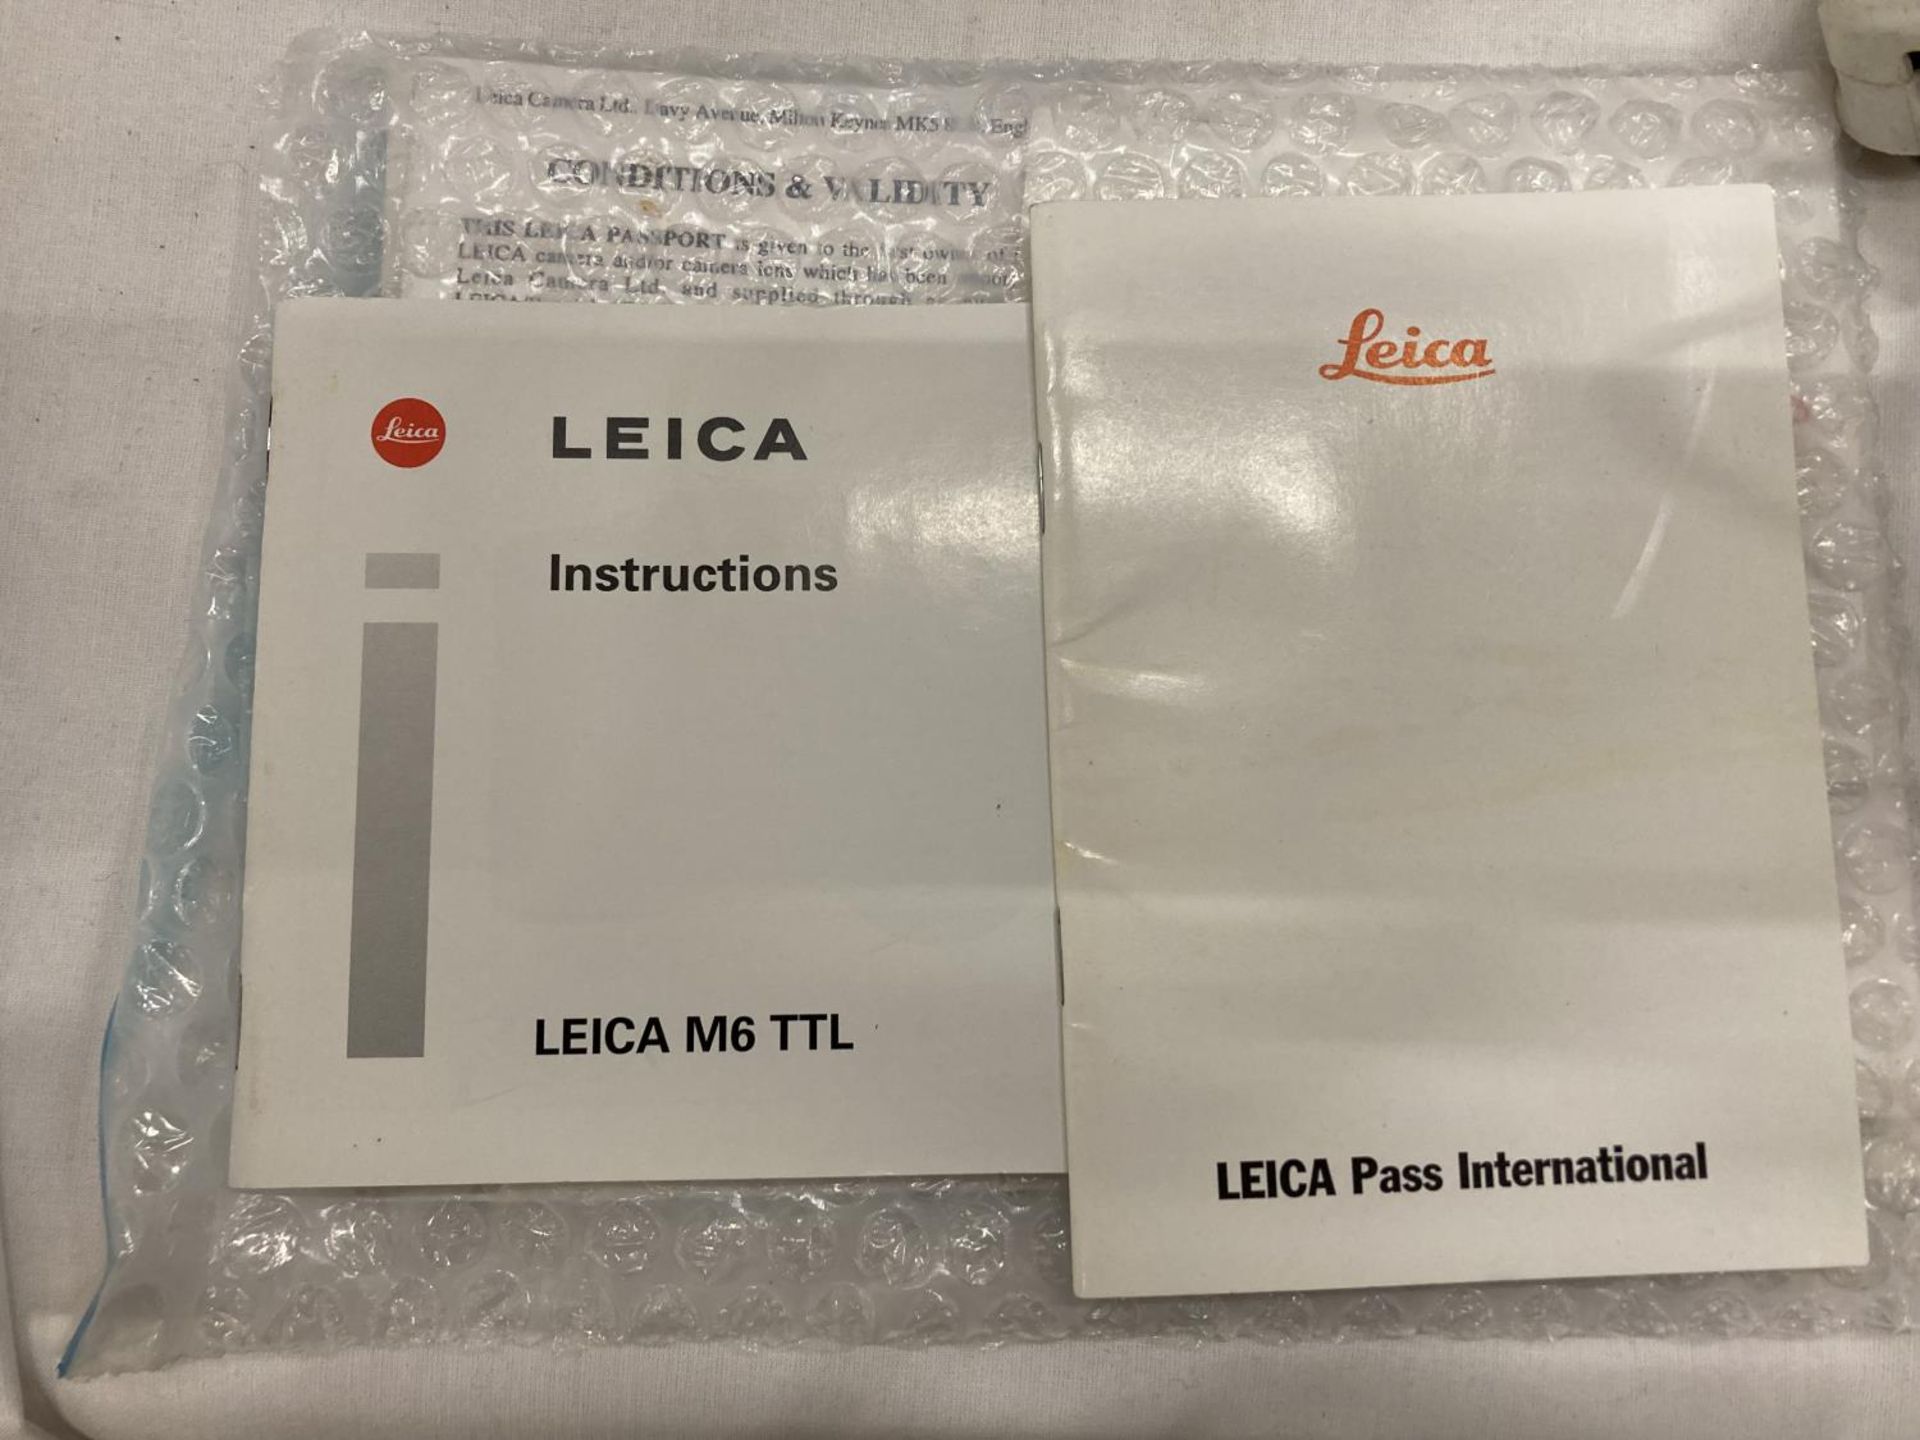 A LEICA CAMERA IN ORIGINAL BOX TOGETHER WITH PAPERWORK AND BATTERY CHARGER AND INSTRUCTIONS - Image 5 of 5